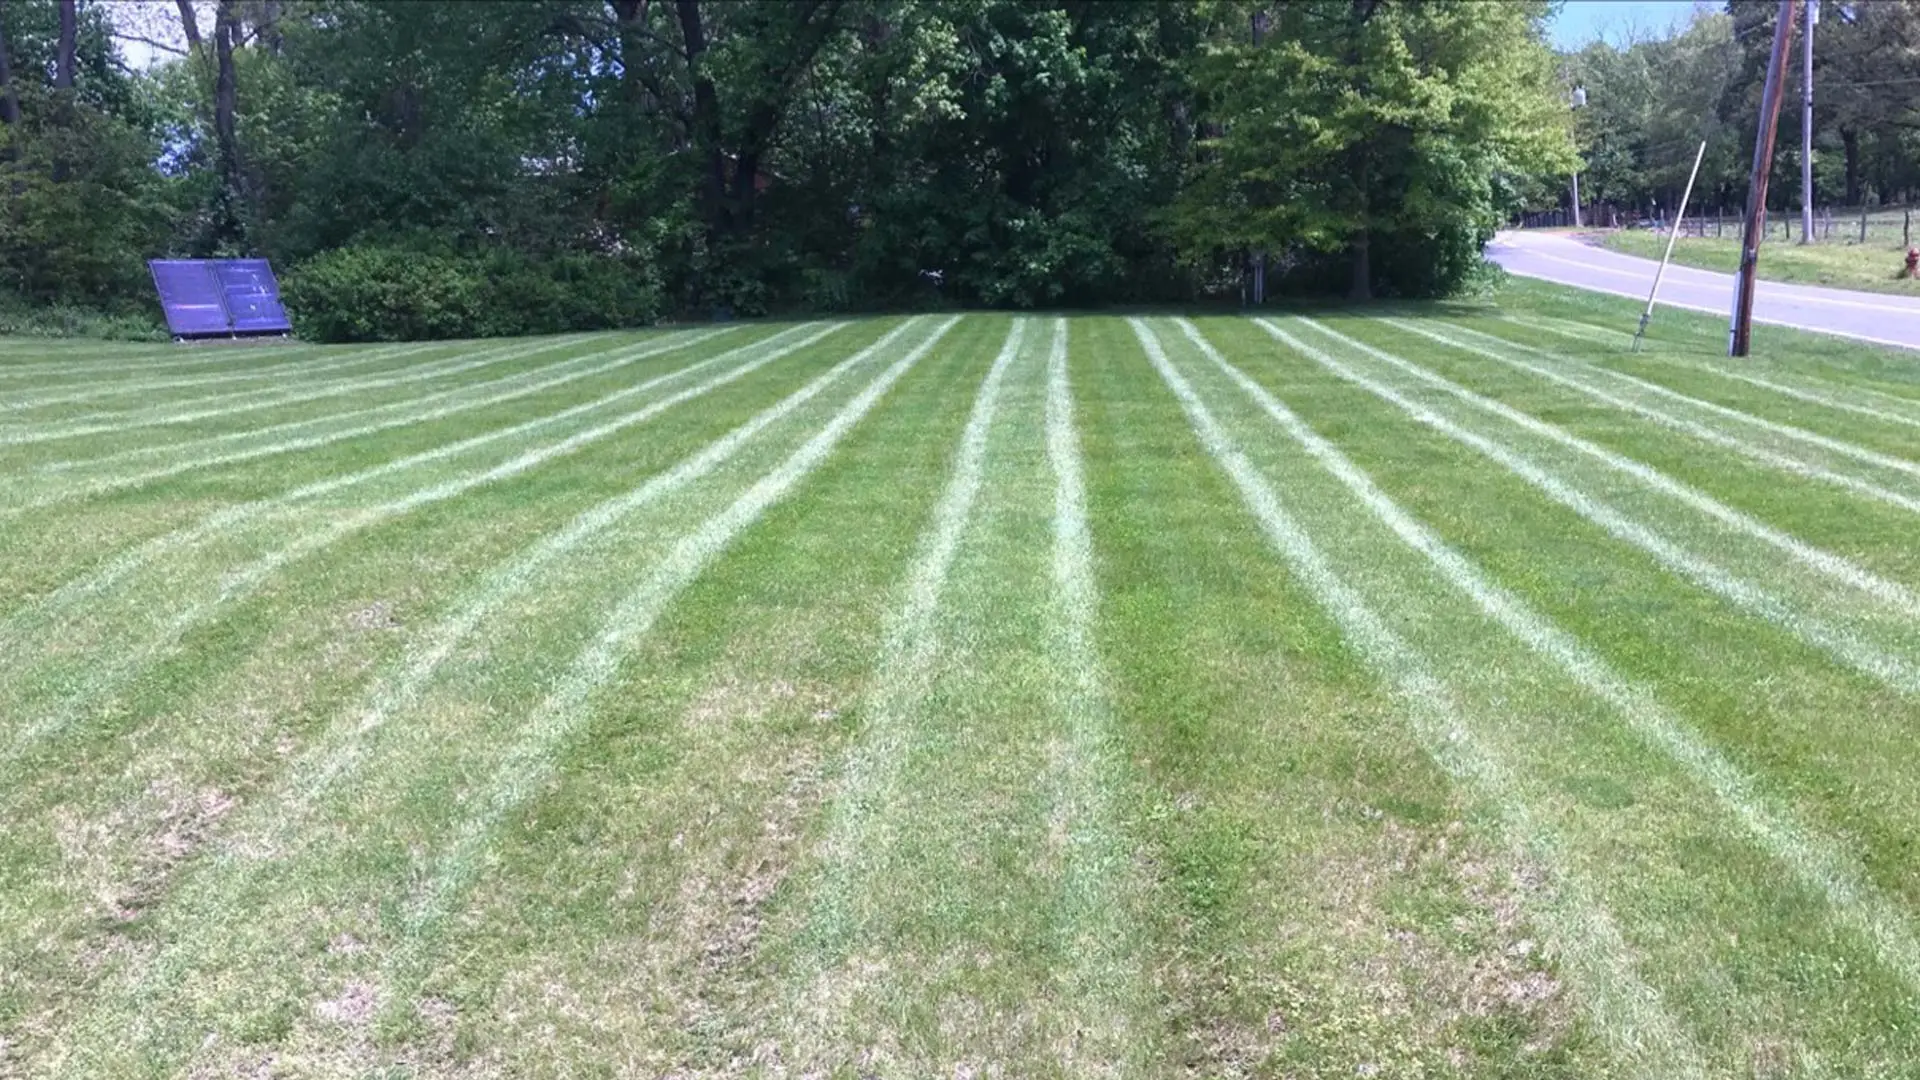 A large rural property in Hyde Park, NY that we mow on a regular basis.